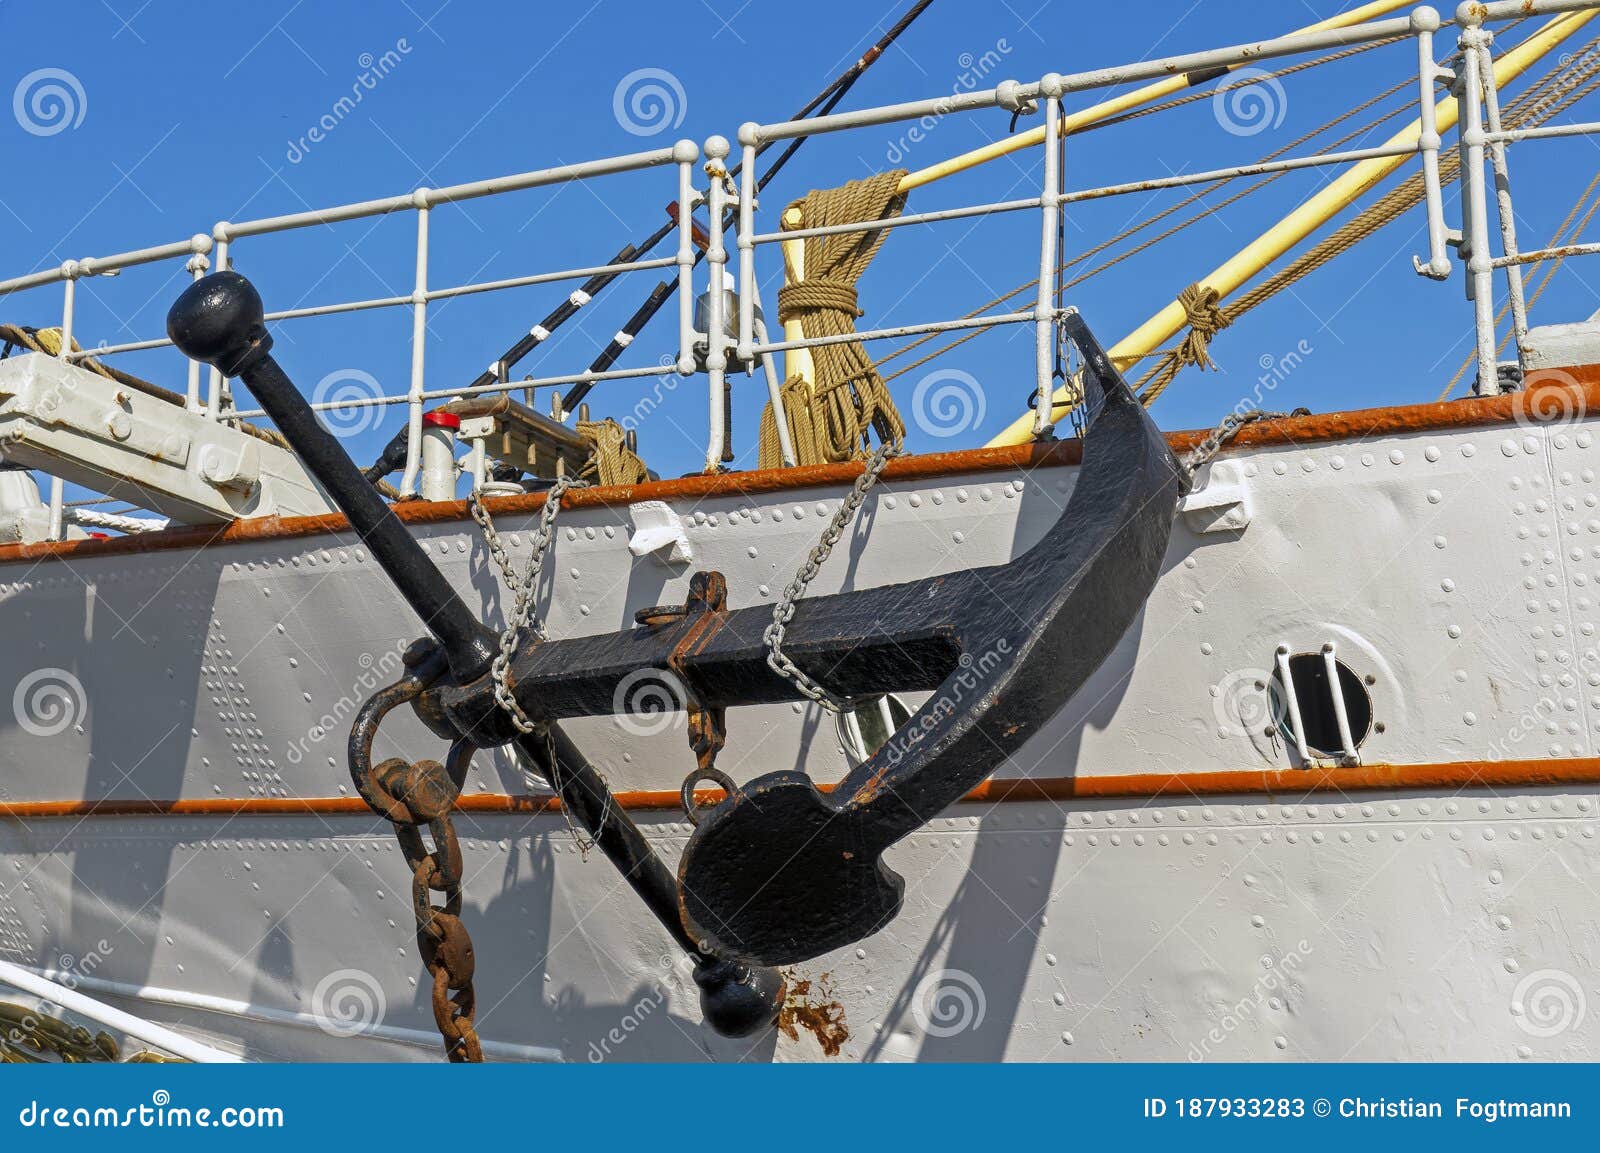 Big Black Anchor Attached To a Ship Stock Image - Image of vessel, ship:  187933283